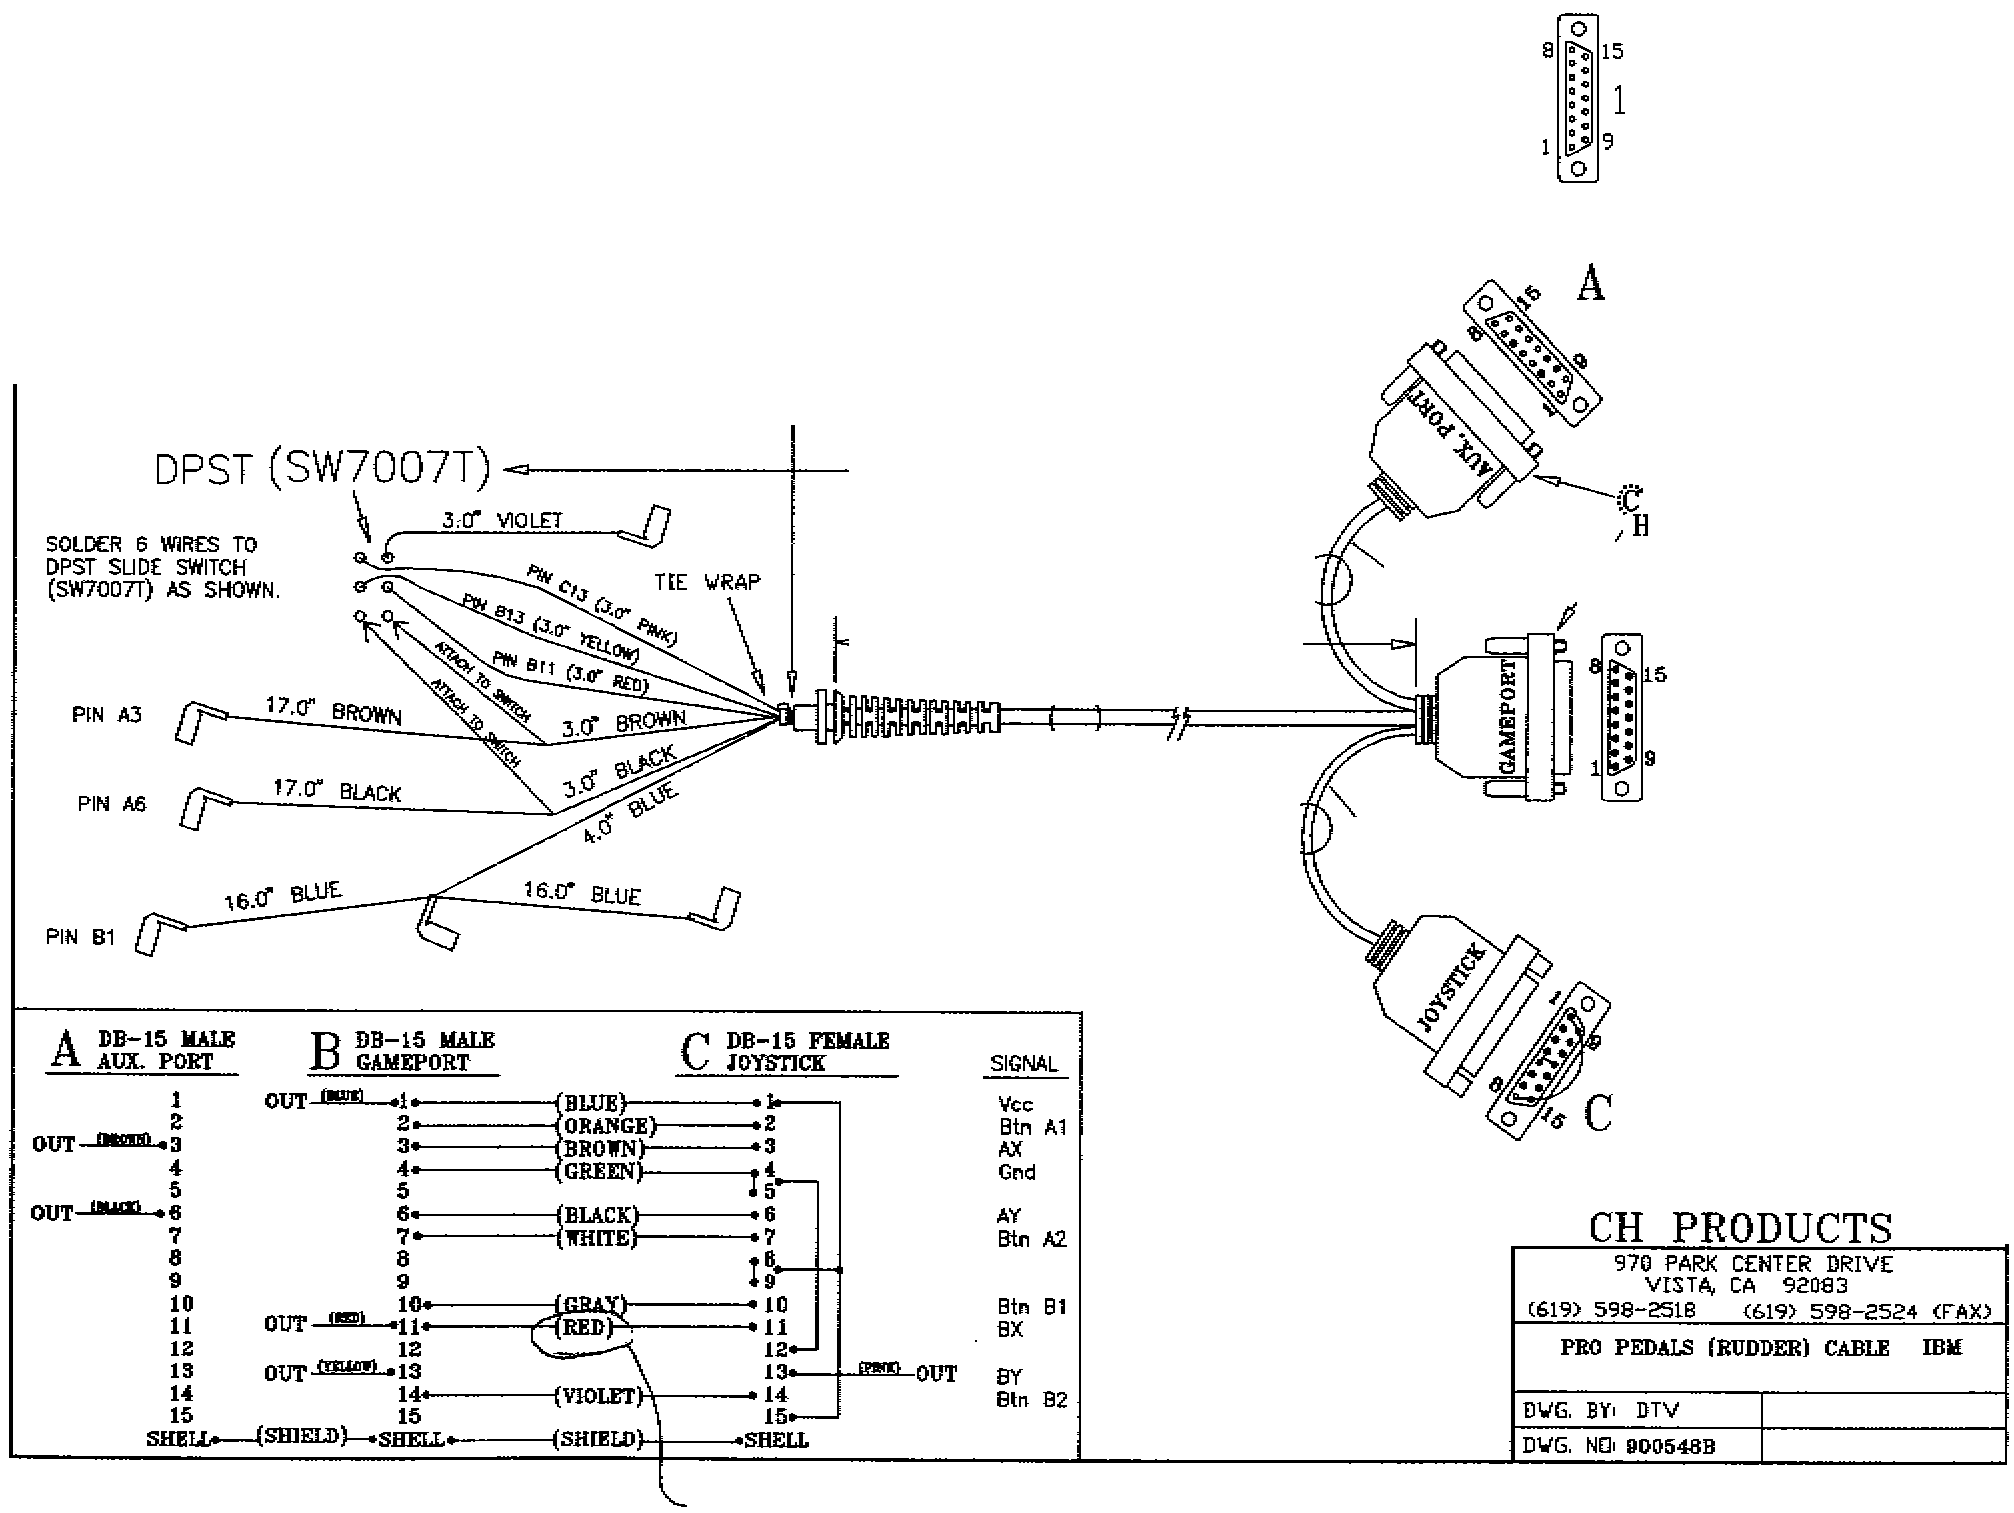 CH Products Pro Pedals Technical Drawing